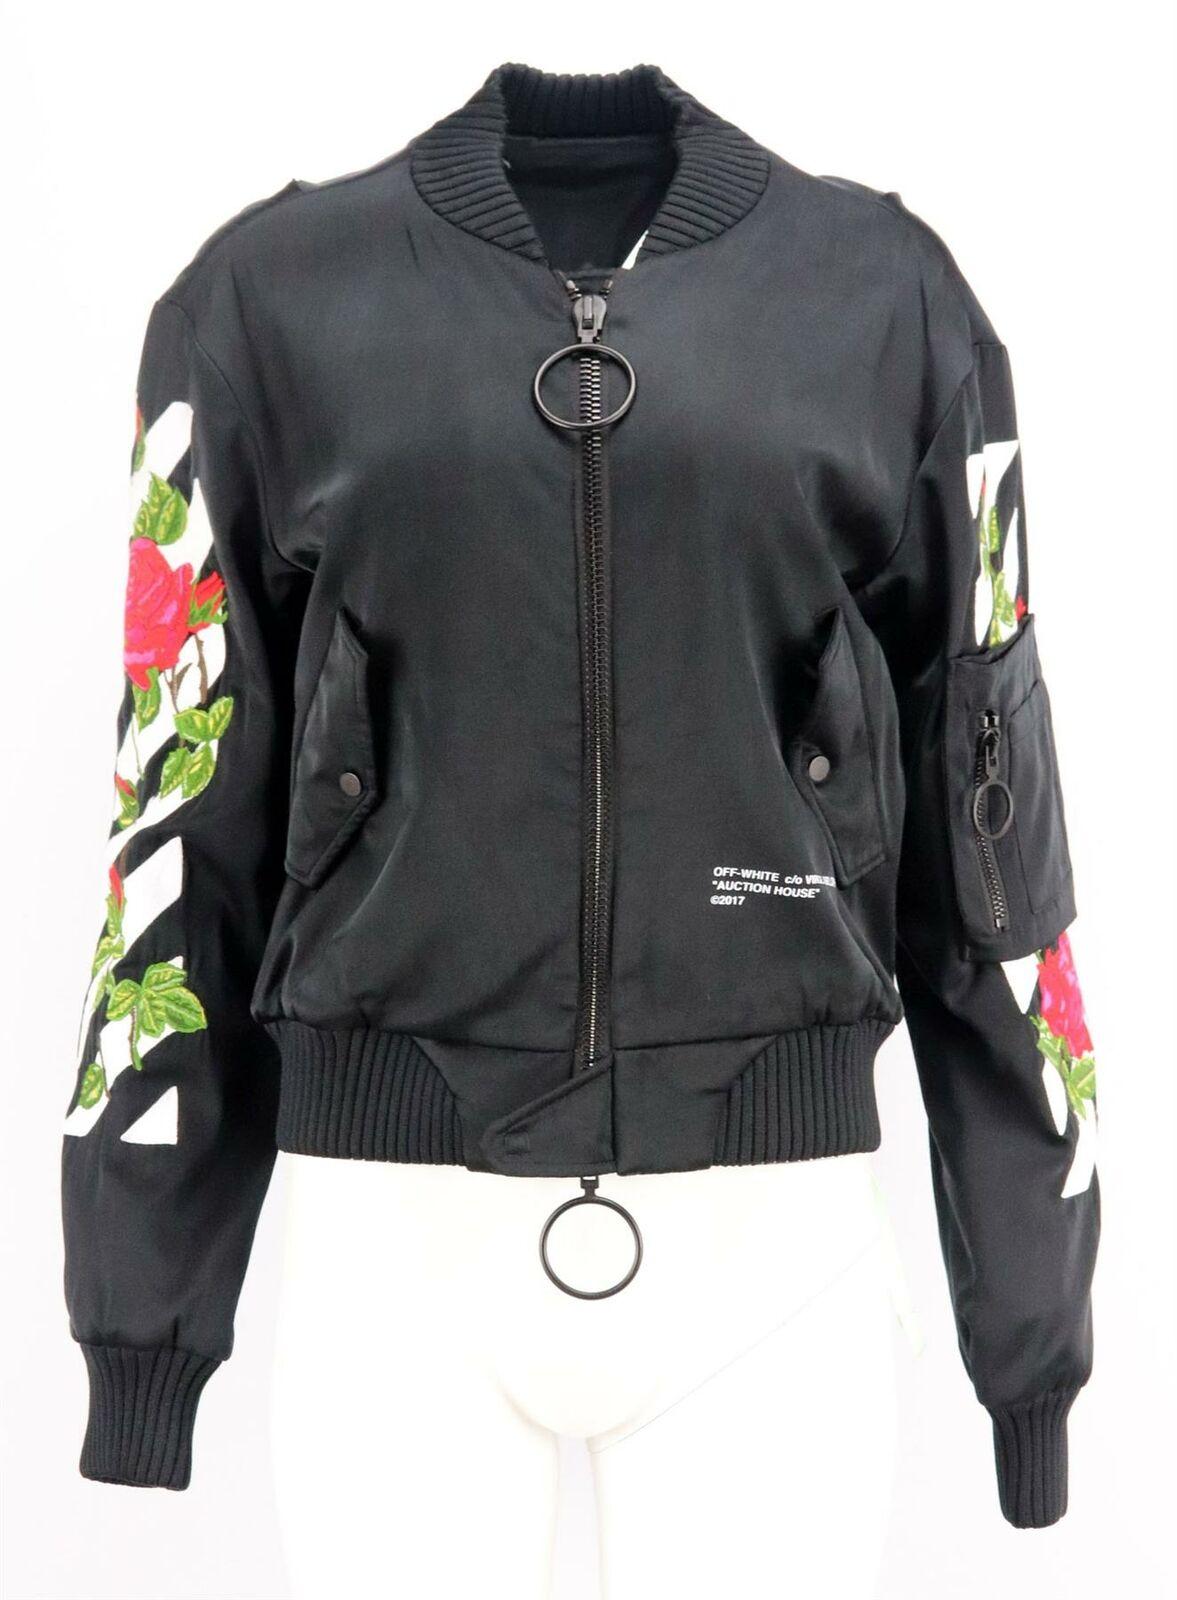 This Off-White by Virgil Abloh jacket is cut from lustrous black satin and defined by white striped and red rose embroidery design on the back, the bomber jacket style has oversized matte black hardware to add to the cool aesthetic.
Black satin.
Zip